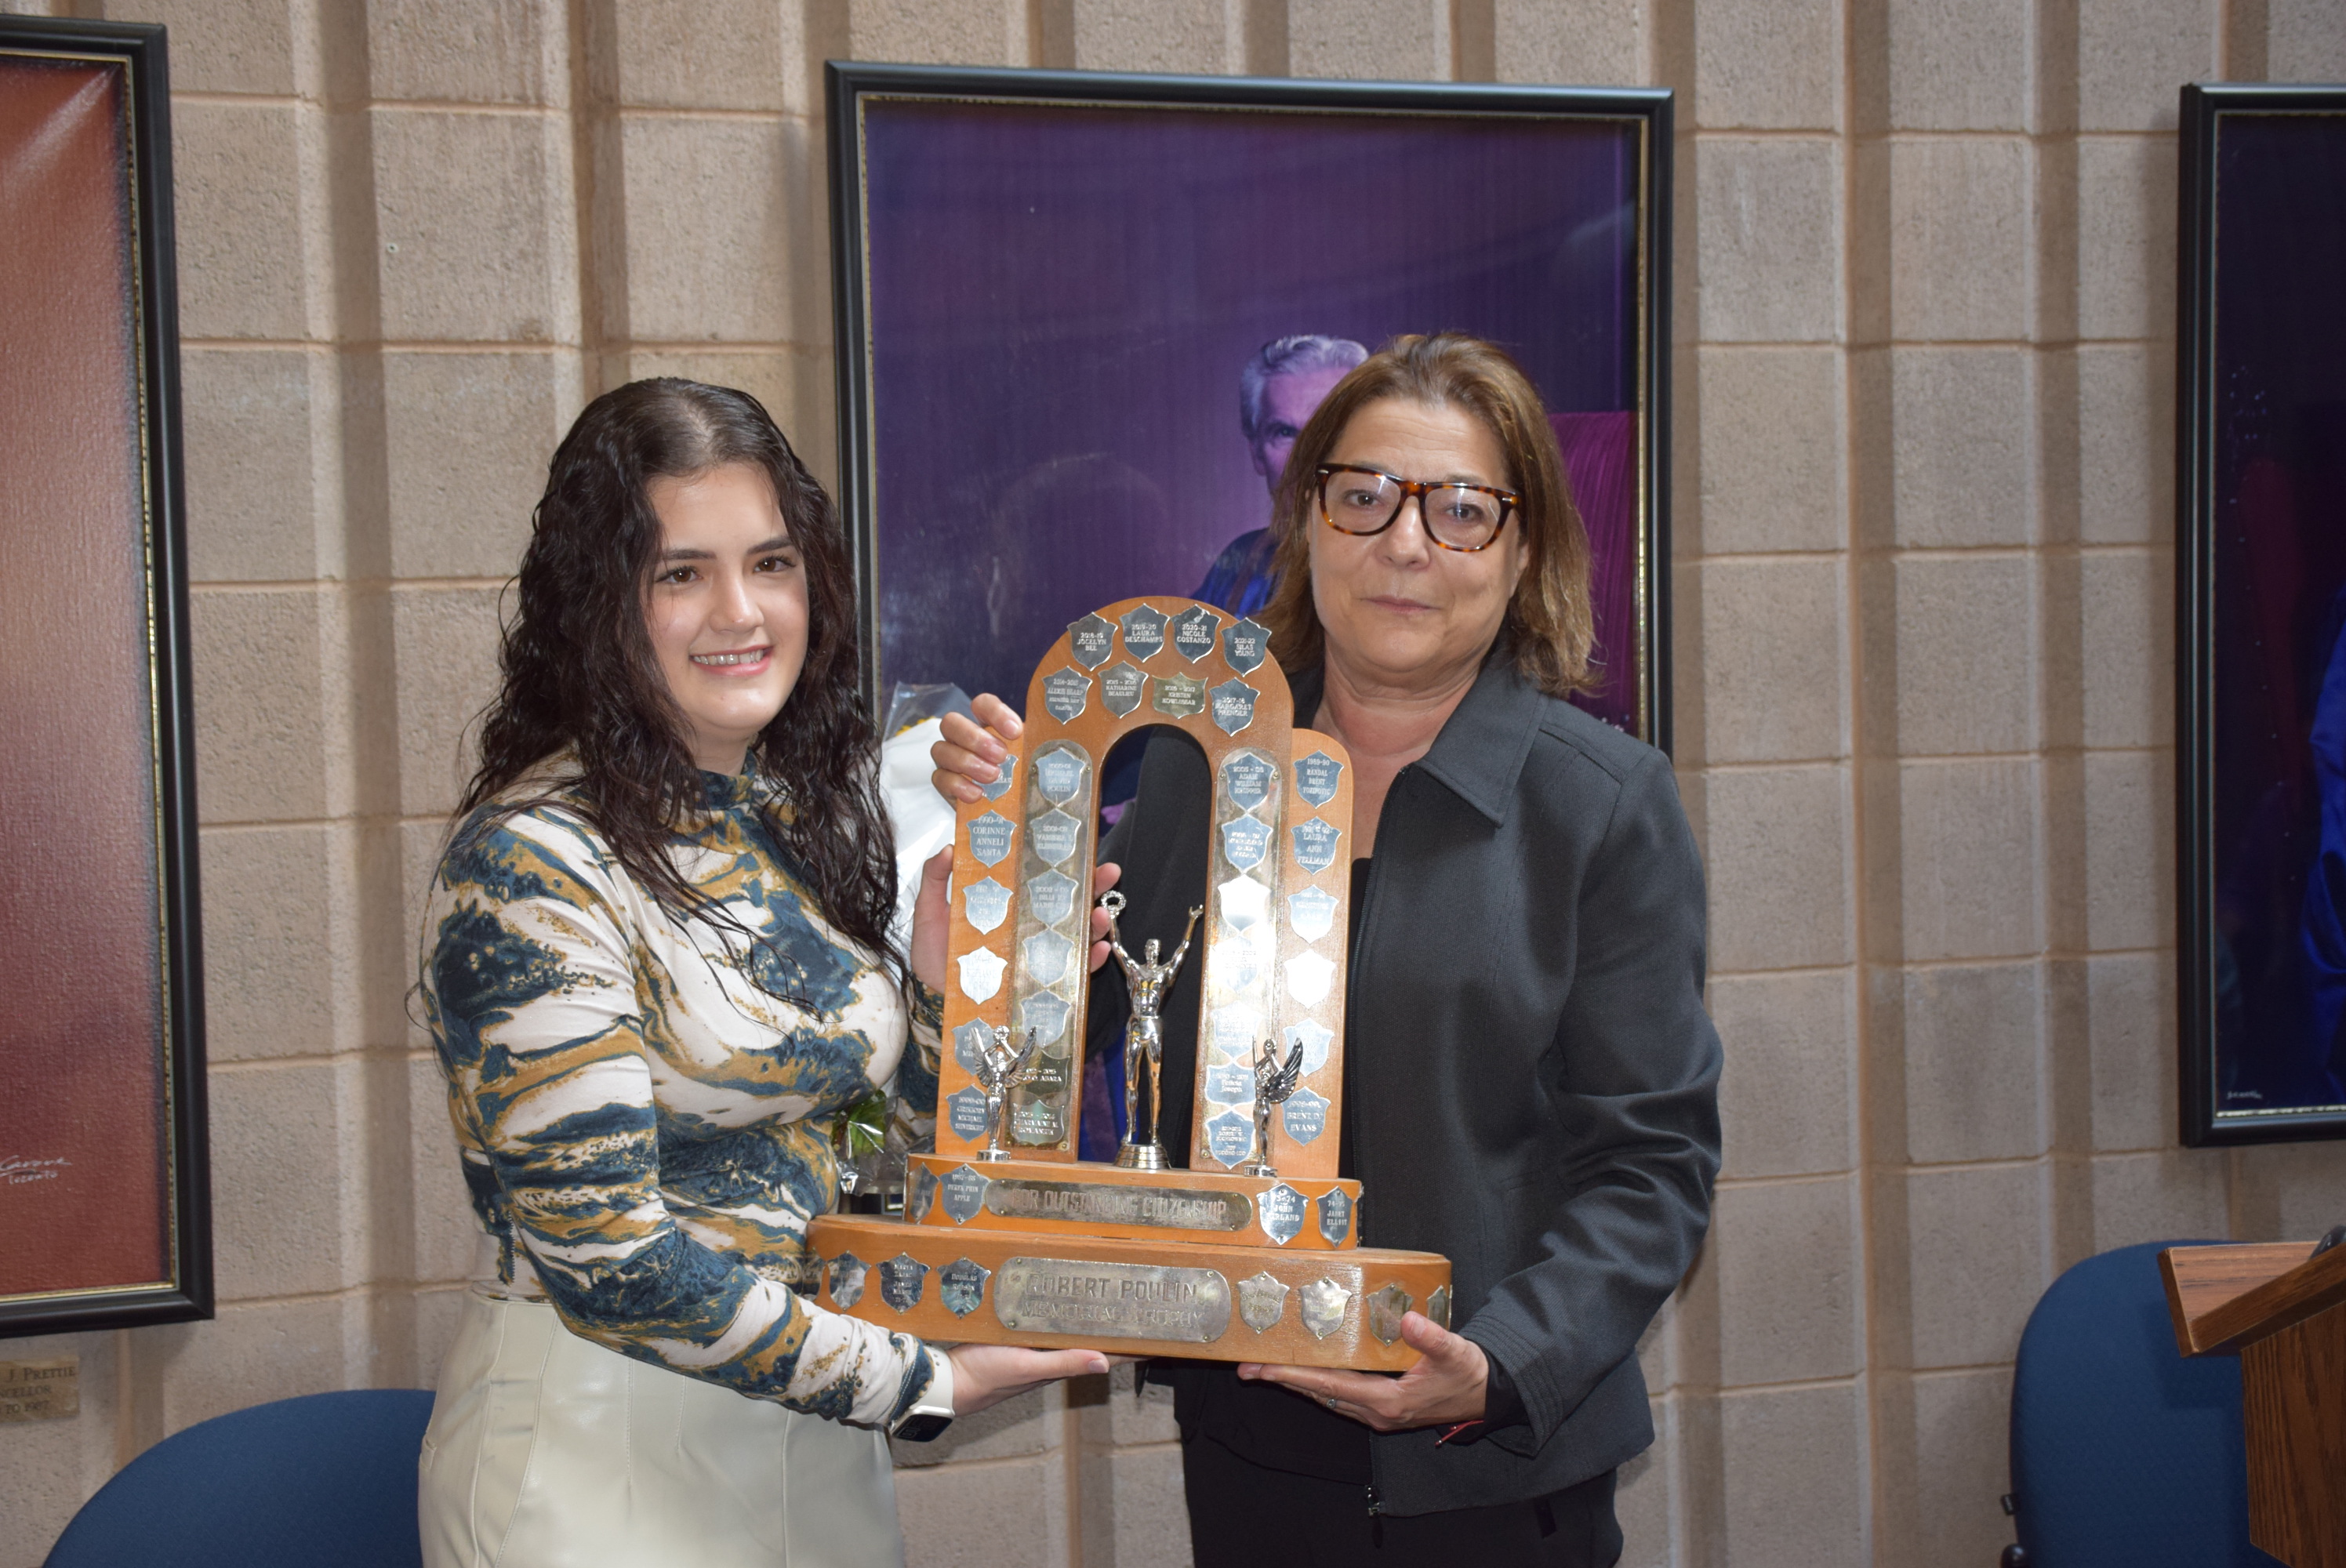 Photo of Marcela Garcia Bueno receiving the Robert Poulin Award trophy from Maria Vasanelli, Chair of Lakehead's Board of Governors.